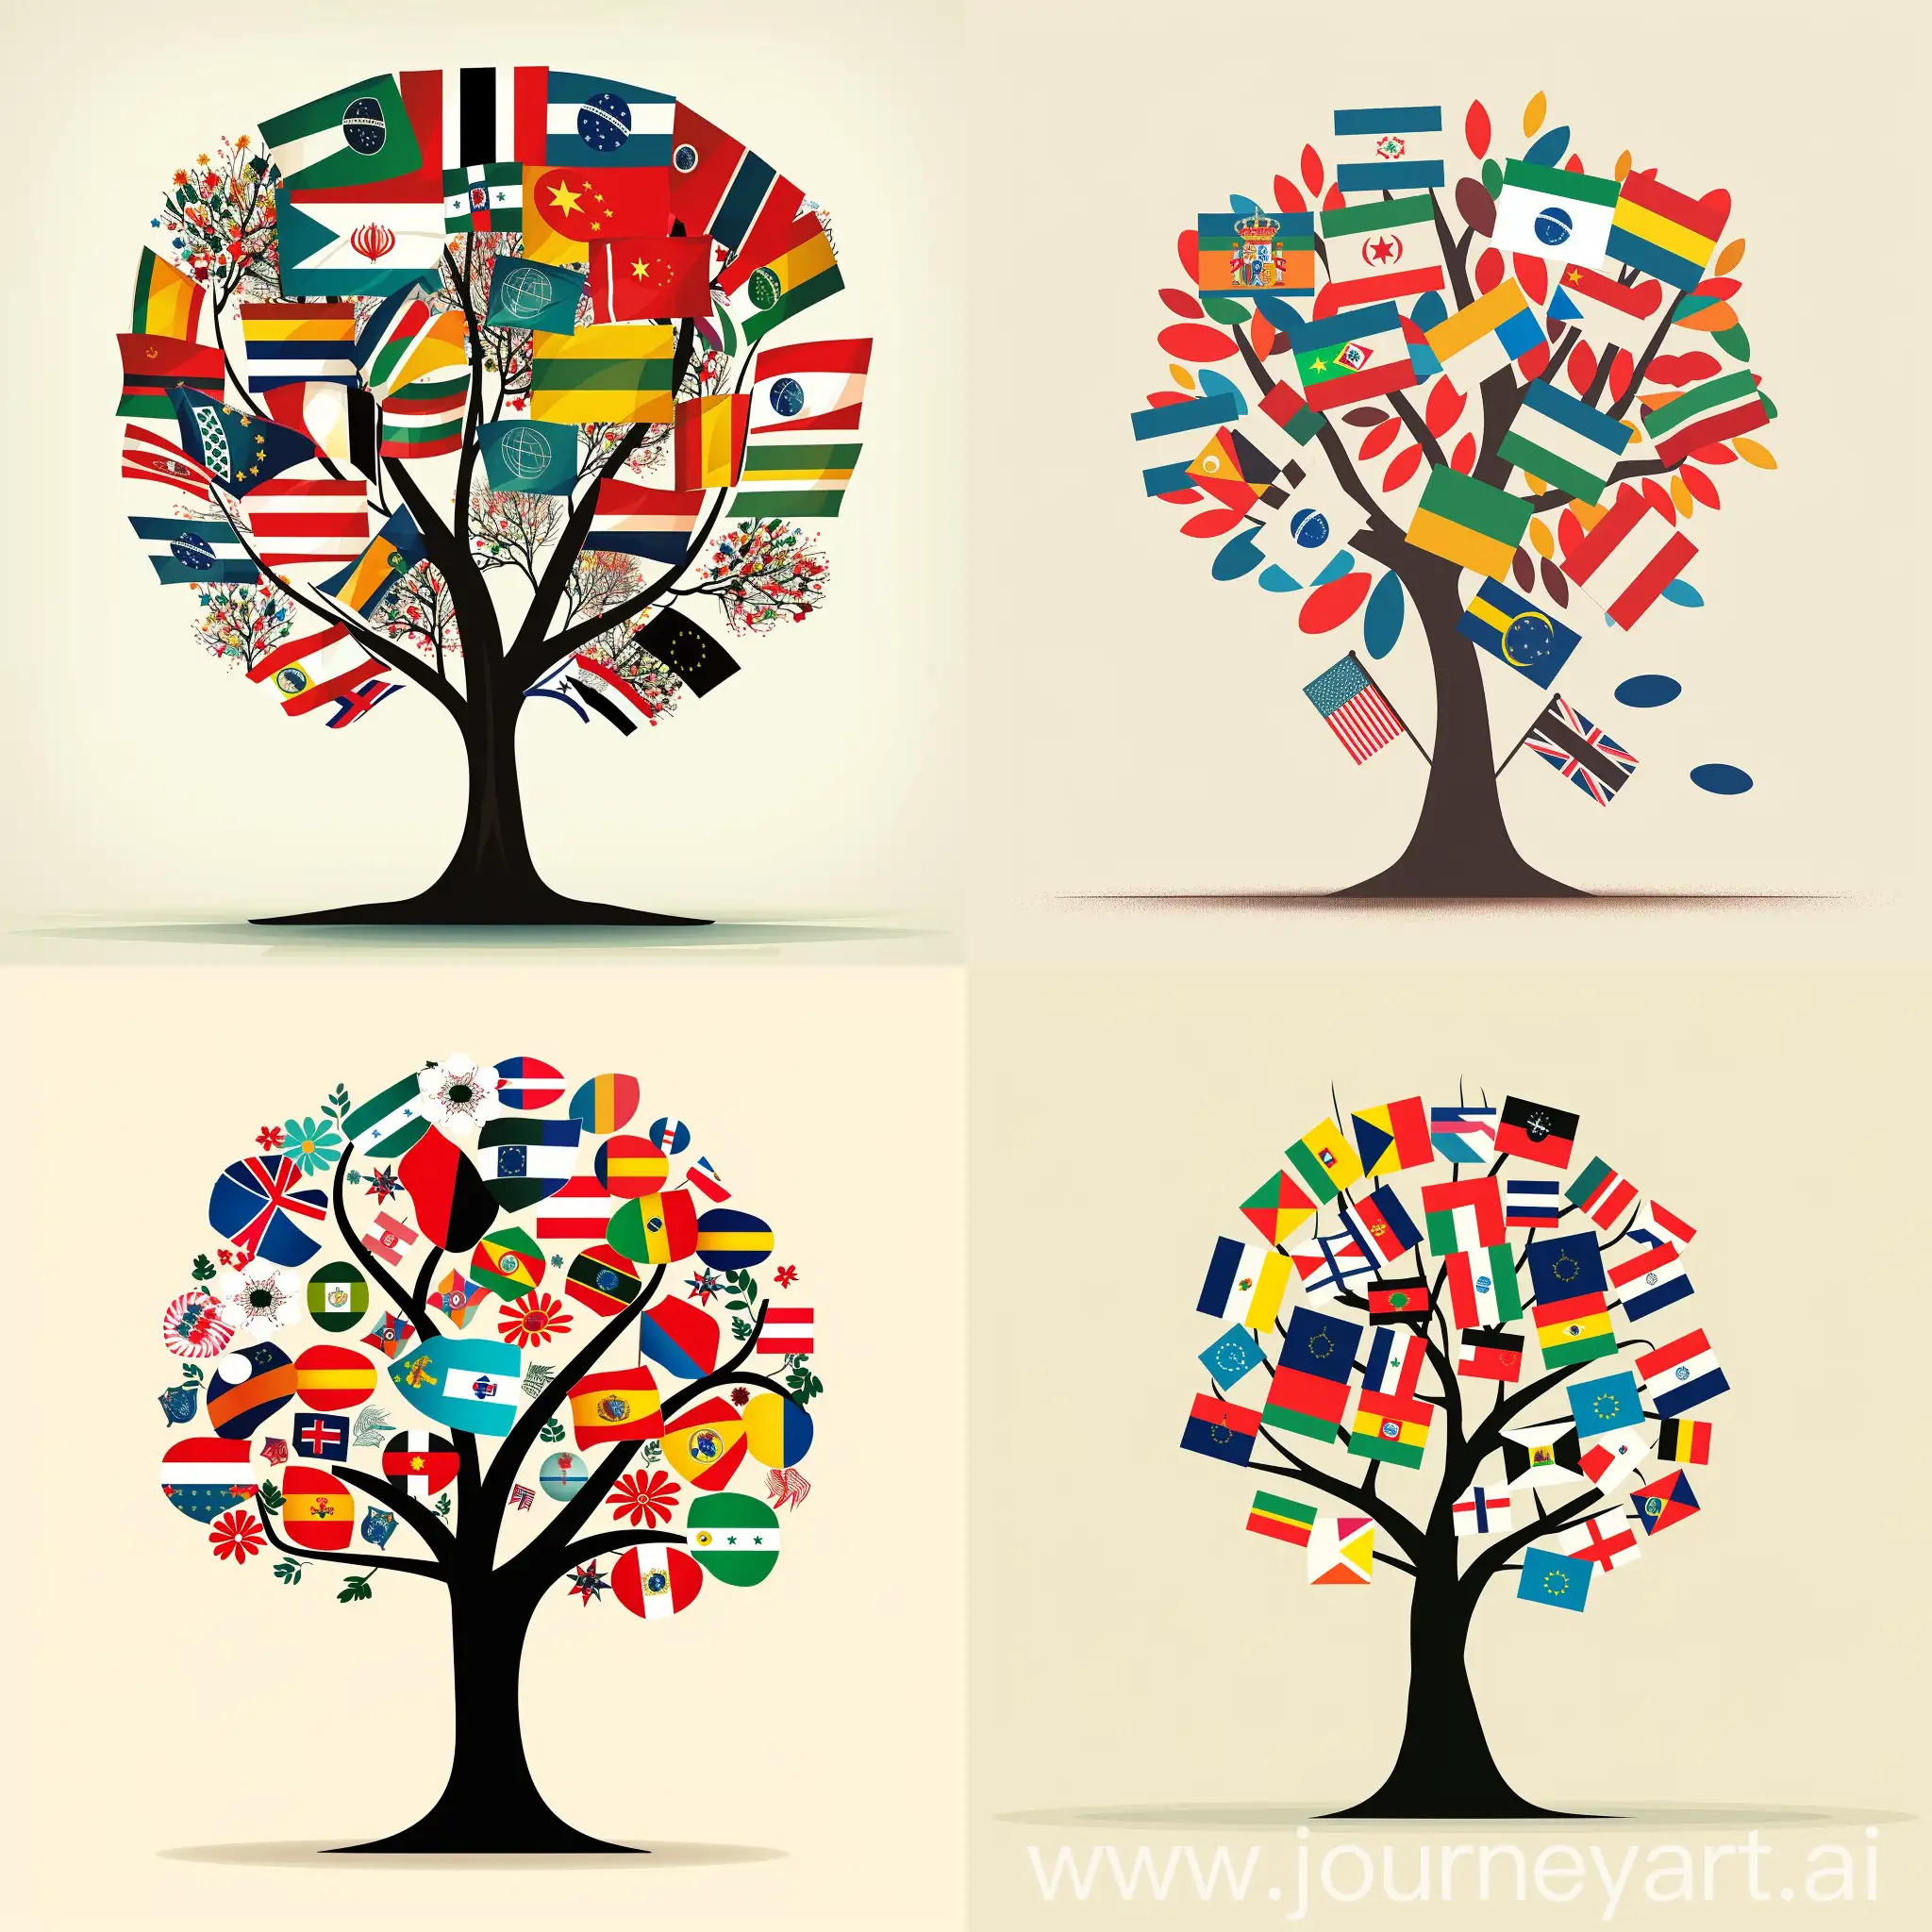 I need an image that represents the spring season, a tree that blooms with flags of different countries and represents the study of foreign languages

